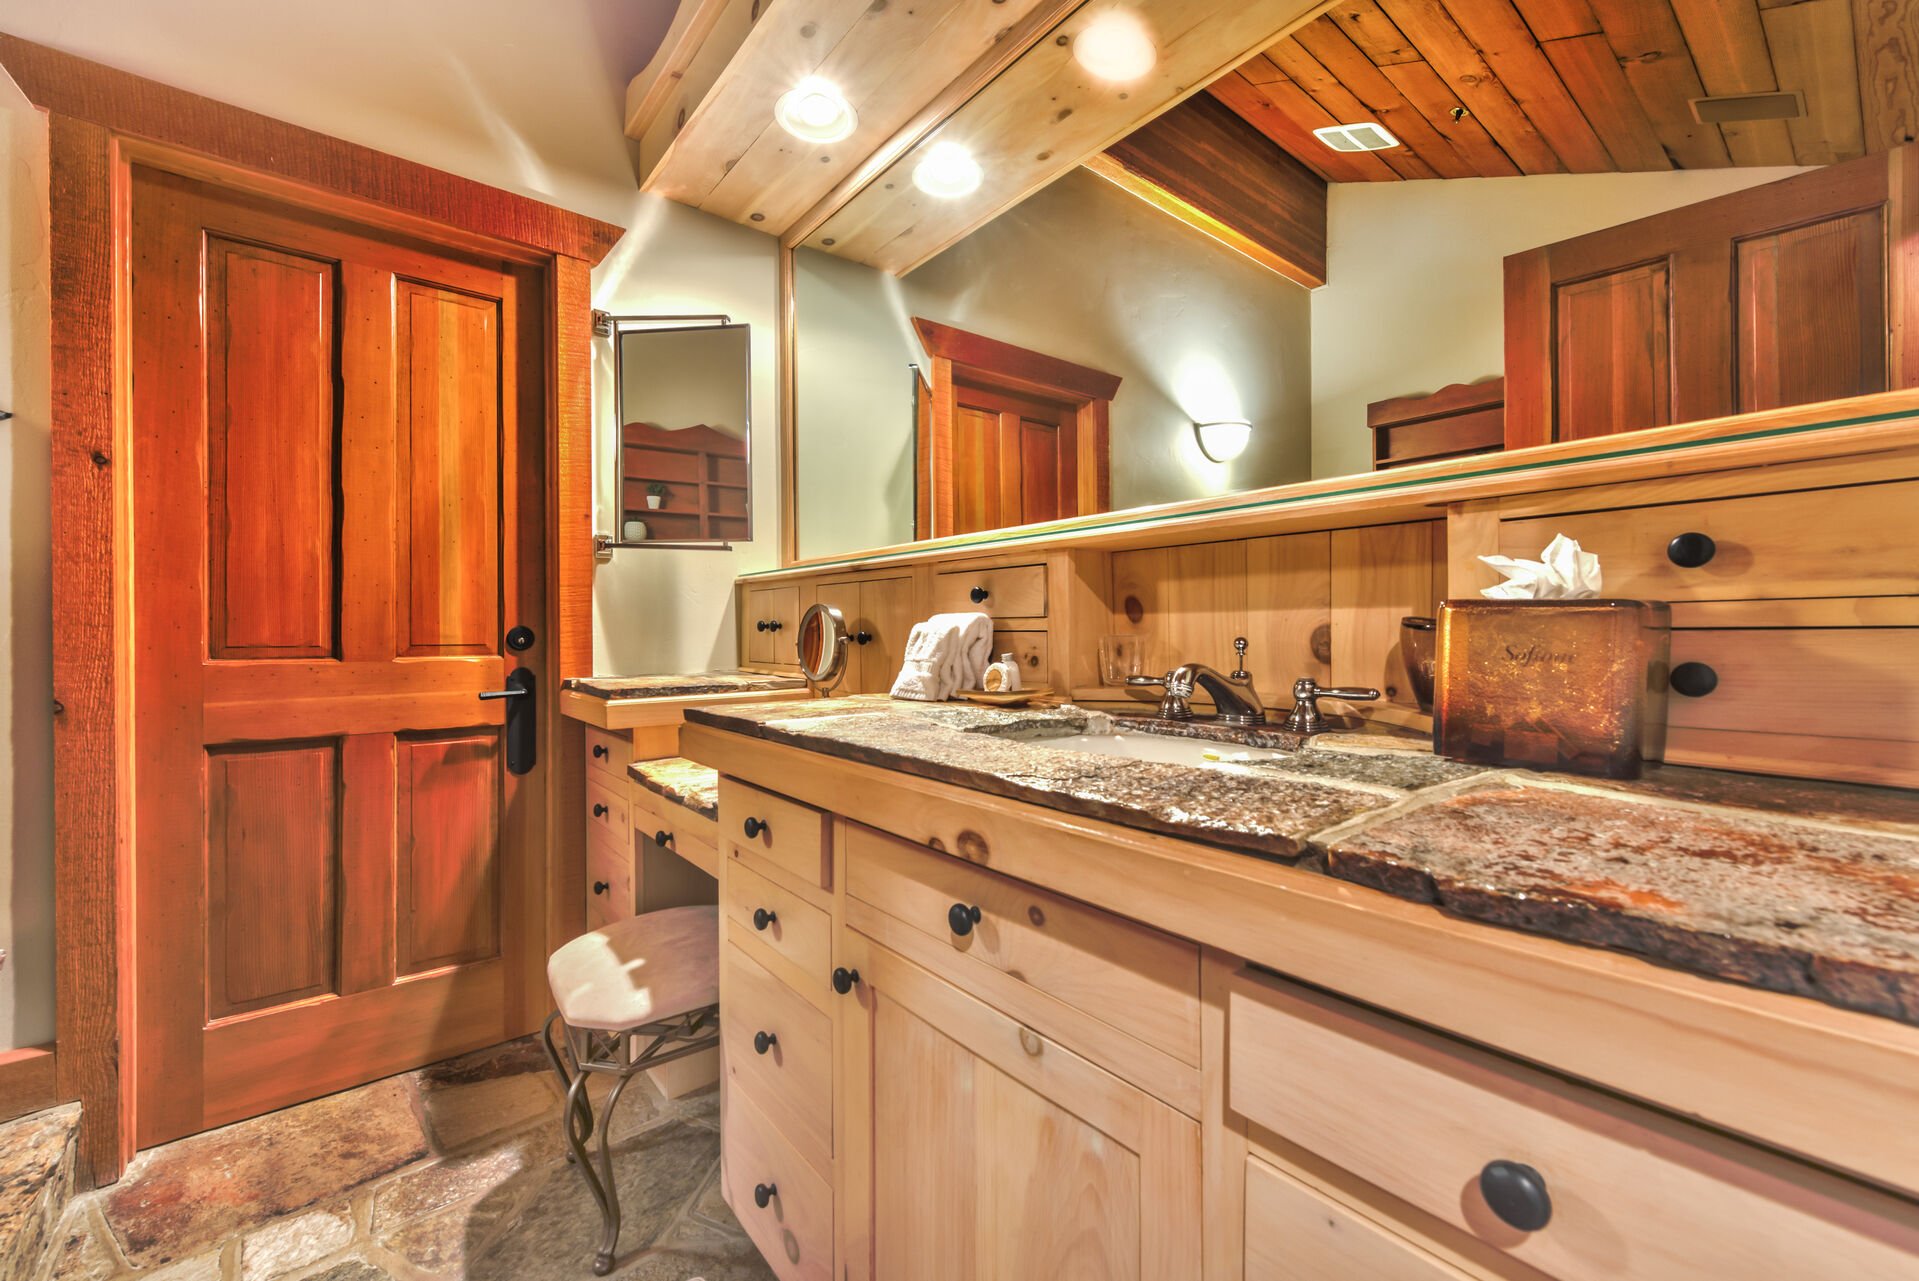 His or Her Master Bathroom with Walk-In Closet, Large Jetted Tub